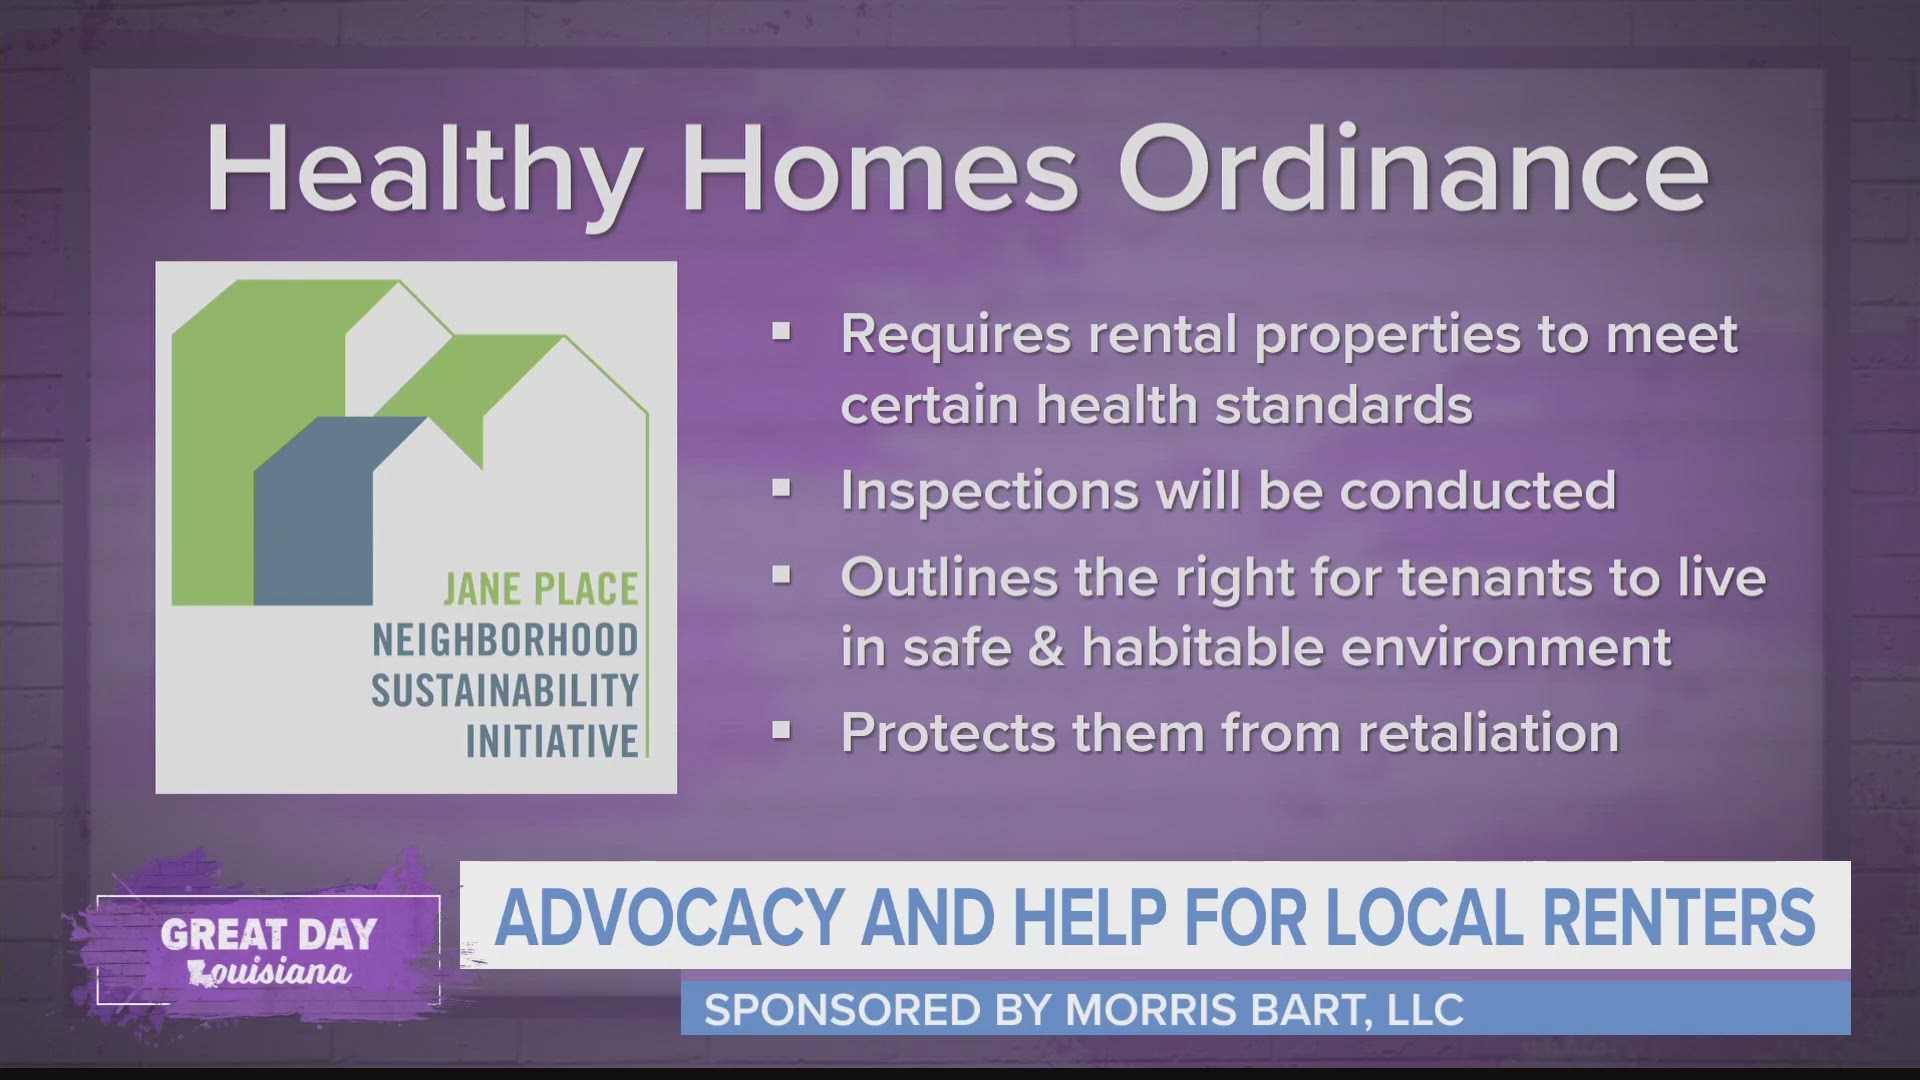 Morris Bart's Impact Give Back segment this month highlights the non-profit Jane Place that helps empower renters and creates sustainable neighborhoods.